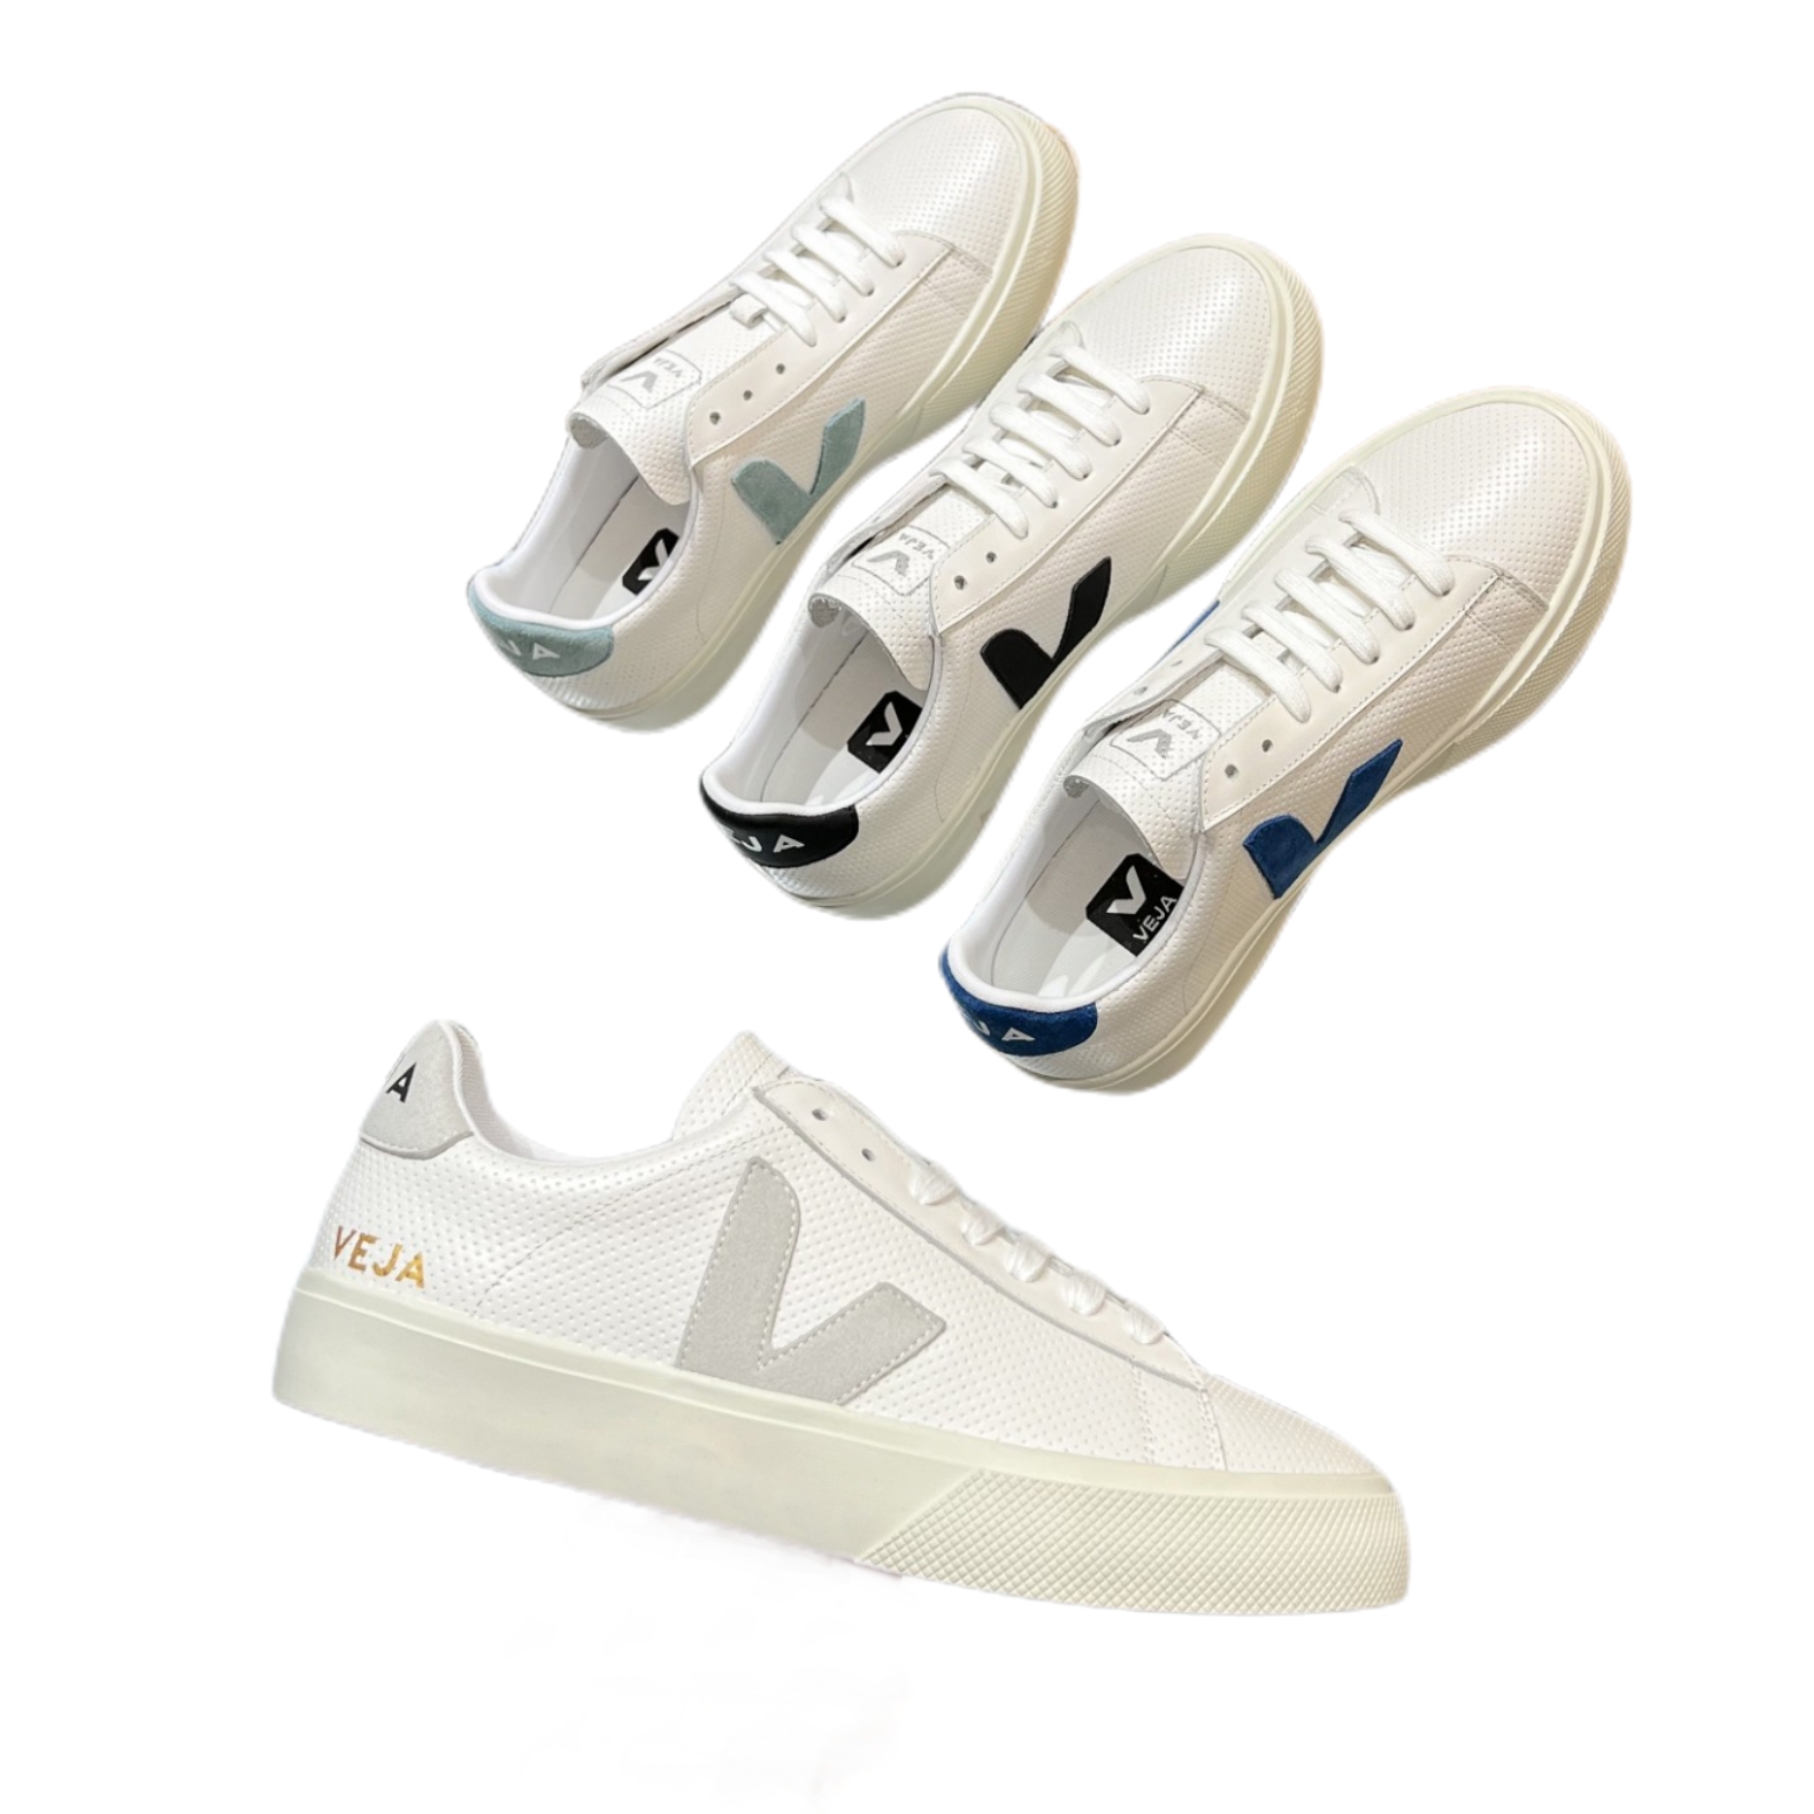 

Men VEJA Designers Casual Shoes Summer Women White California Sneaker Calfskin Genuine Leather Trainers Fashion Lace Up Outdoor High Top VA Word Sneakers size 35-46, 20